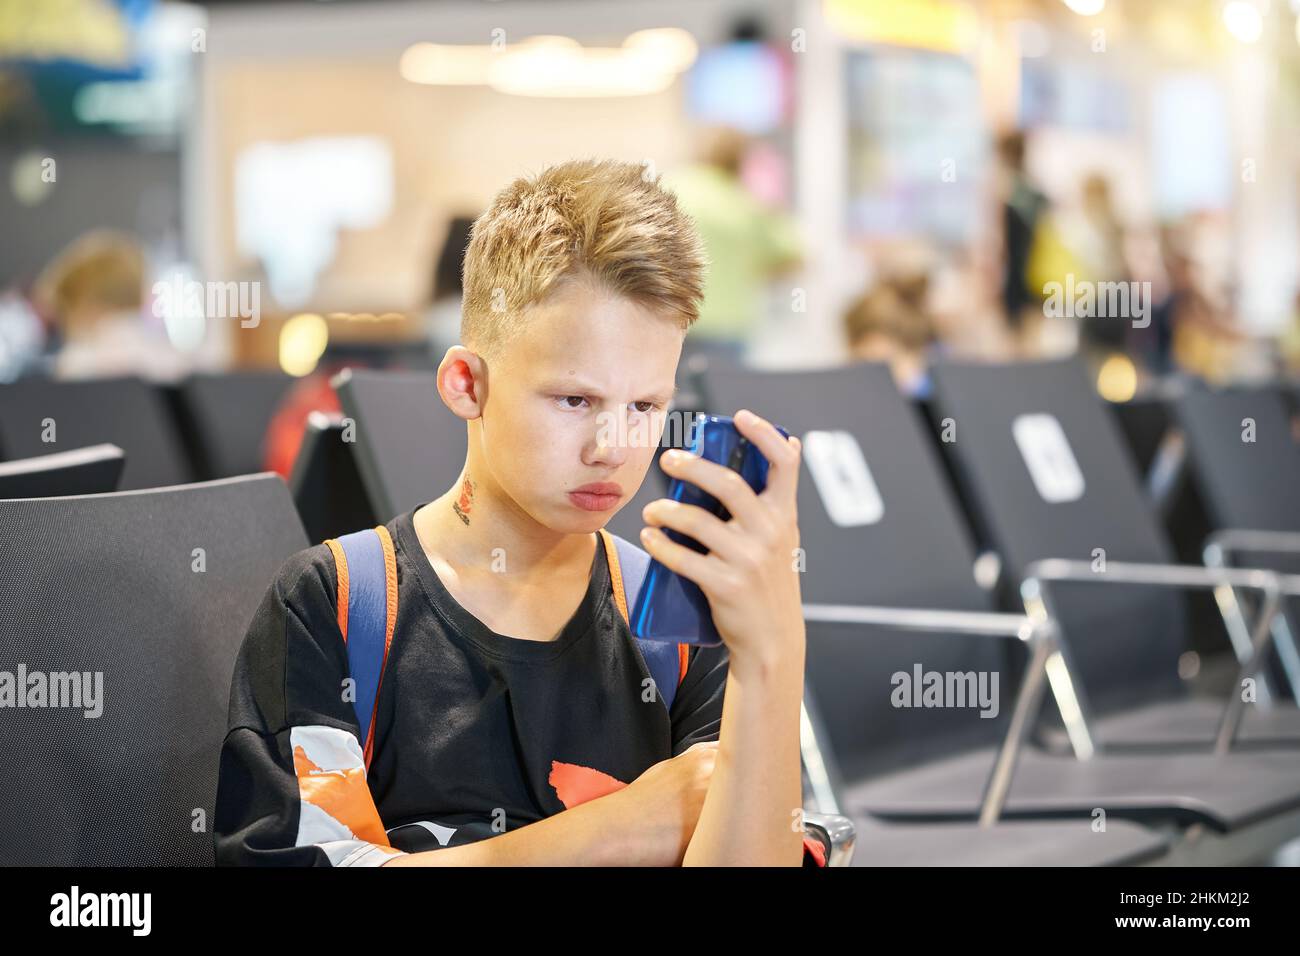 Teenager boy with short blond hairstyle and backpack frowns with serious face expression and reads ebook via phone in airport Stock Photo